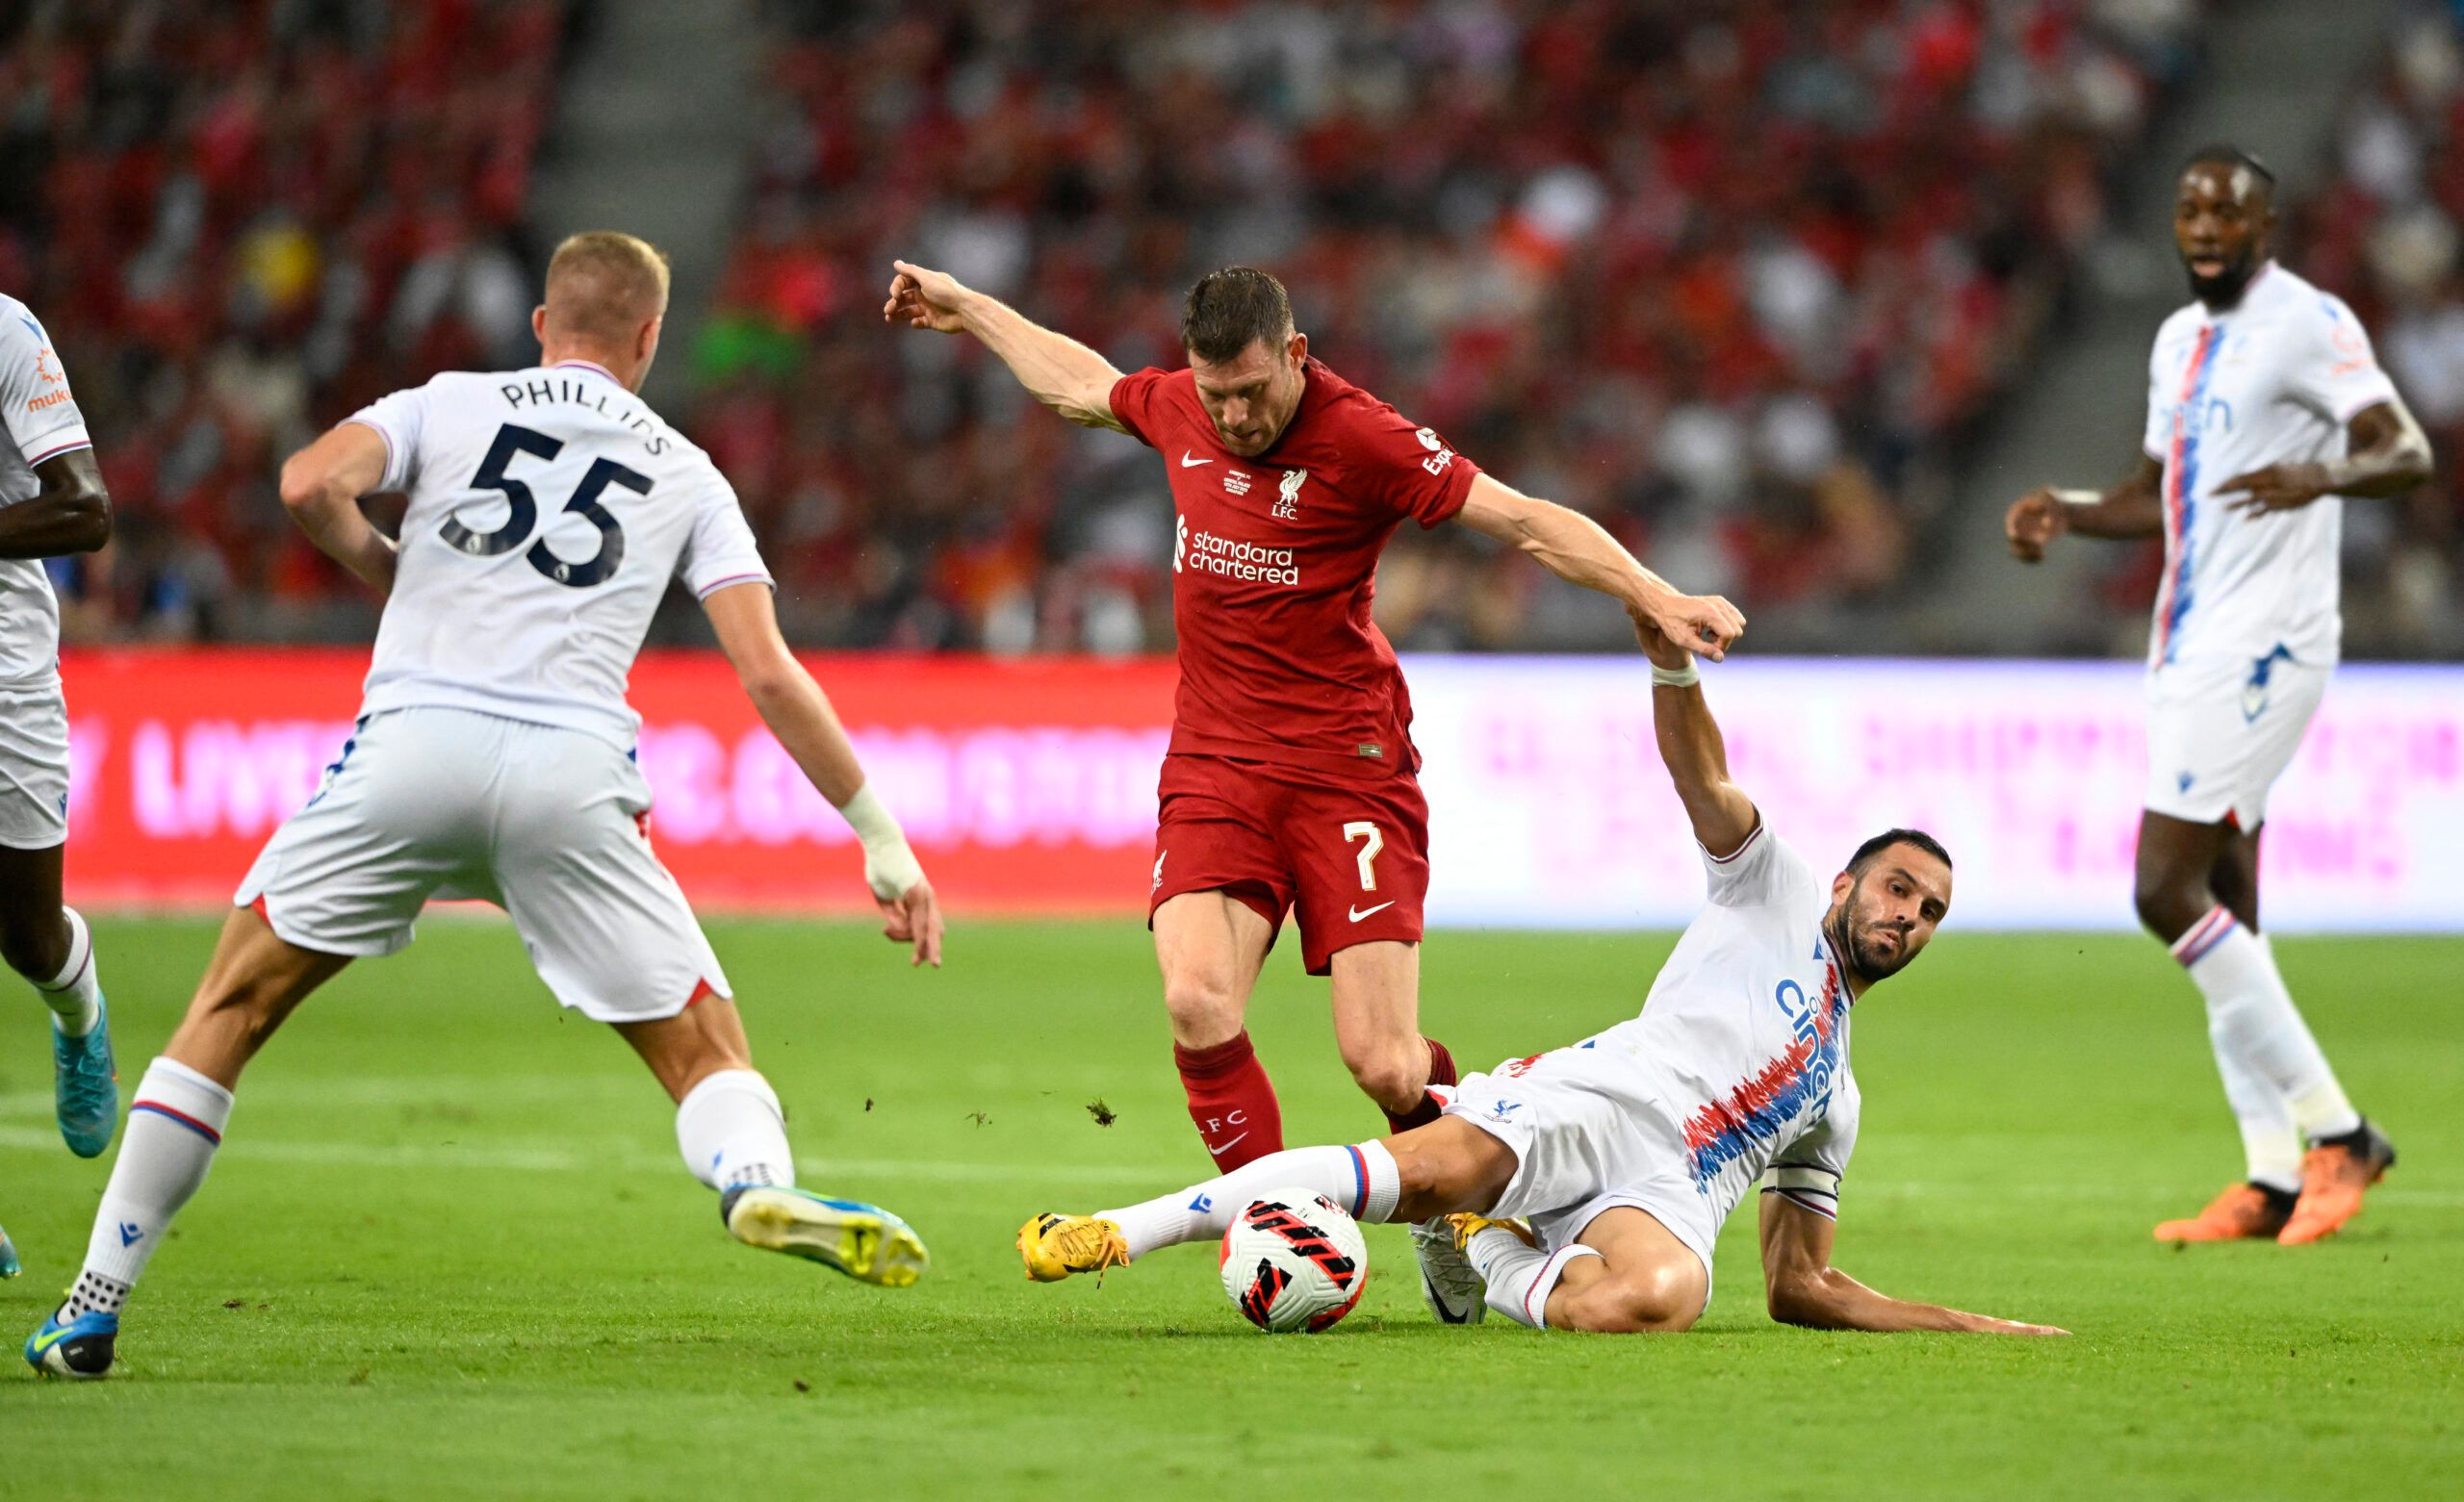 Soccer Football - Pre Season Friendly - Liverpool v Crystal Palace - National Stadium, Kallang, Singapore - July 15, 2022 Liverpool's James Milner in action with Crystal Palace's Luka Milivojevic REUTERS/Caroline Chia